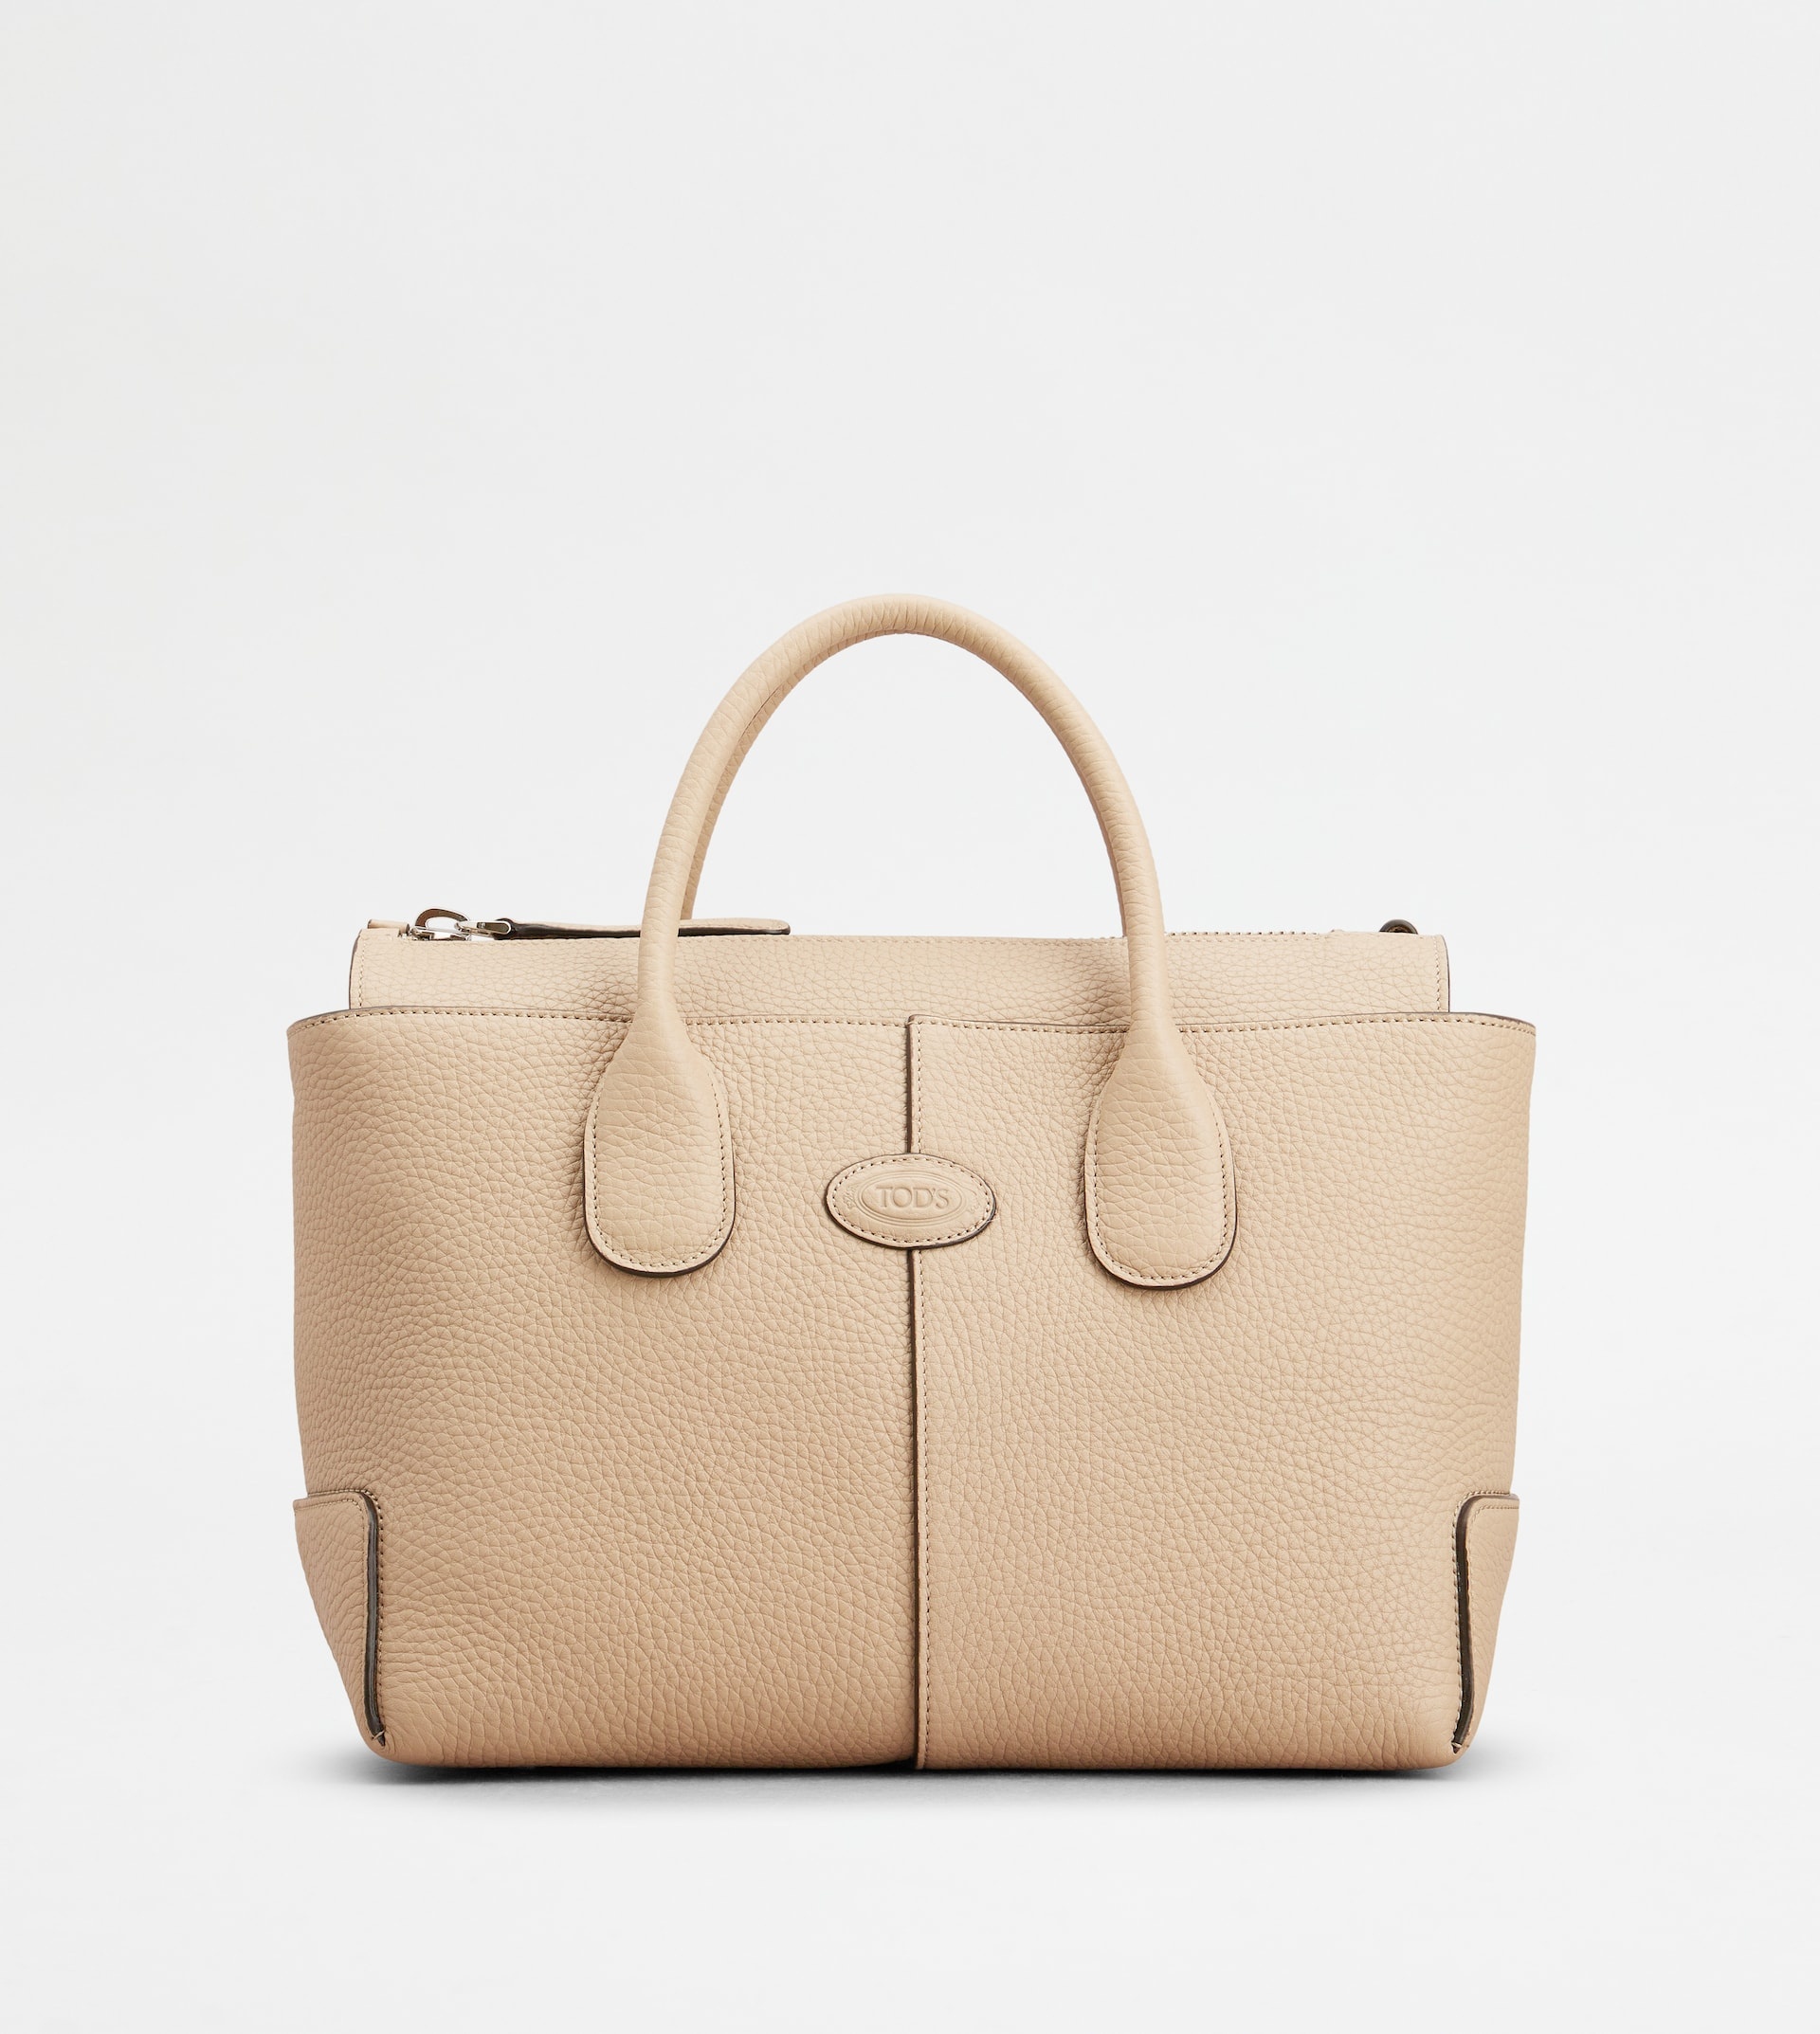 TOD'S DI BAG IN LEATHER SMALL - BEIGE - 1